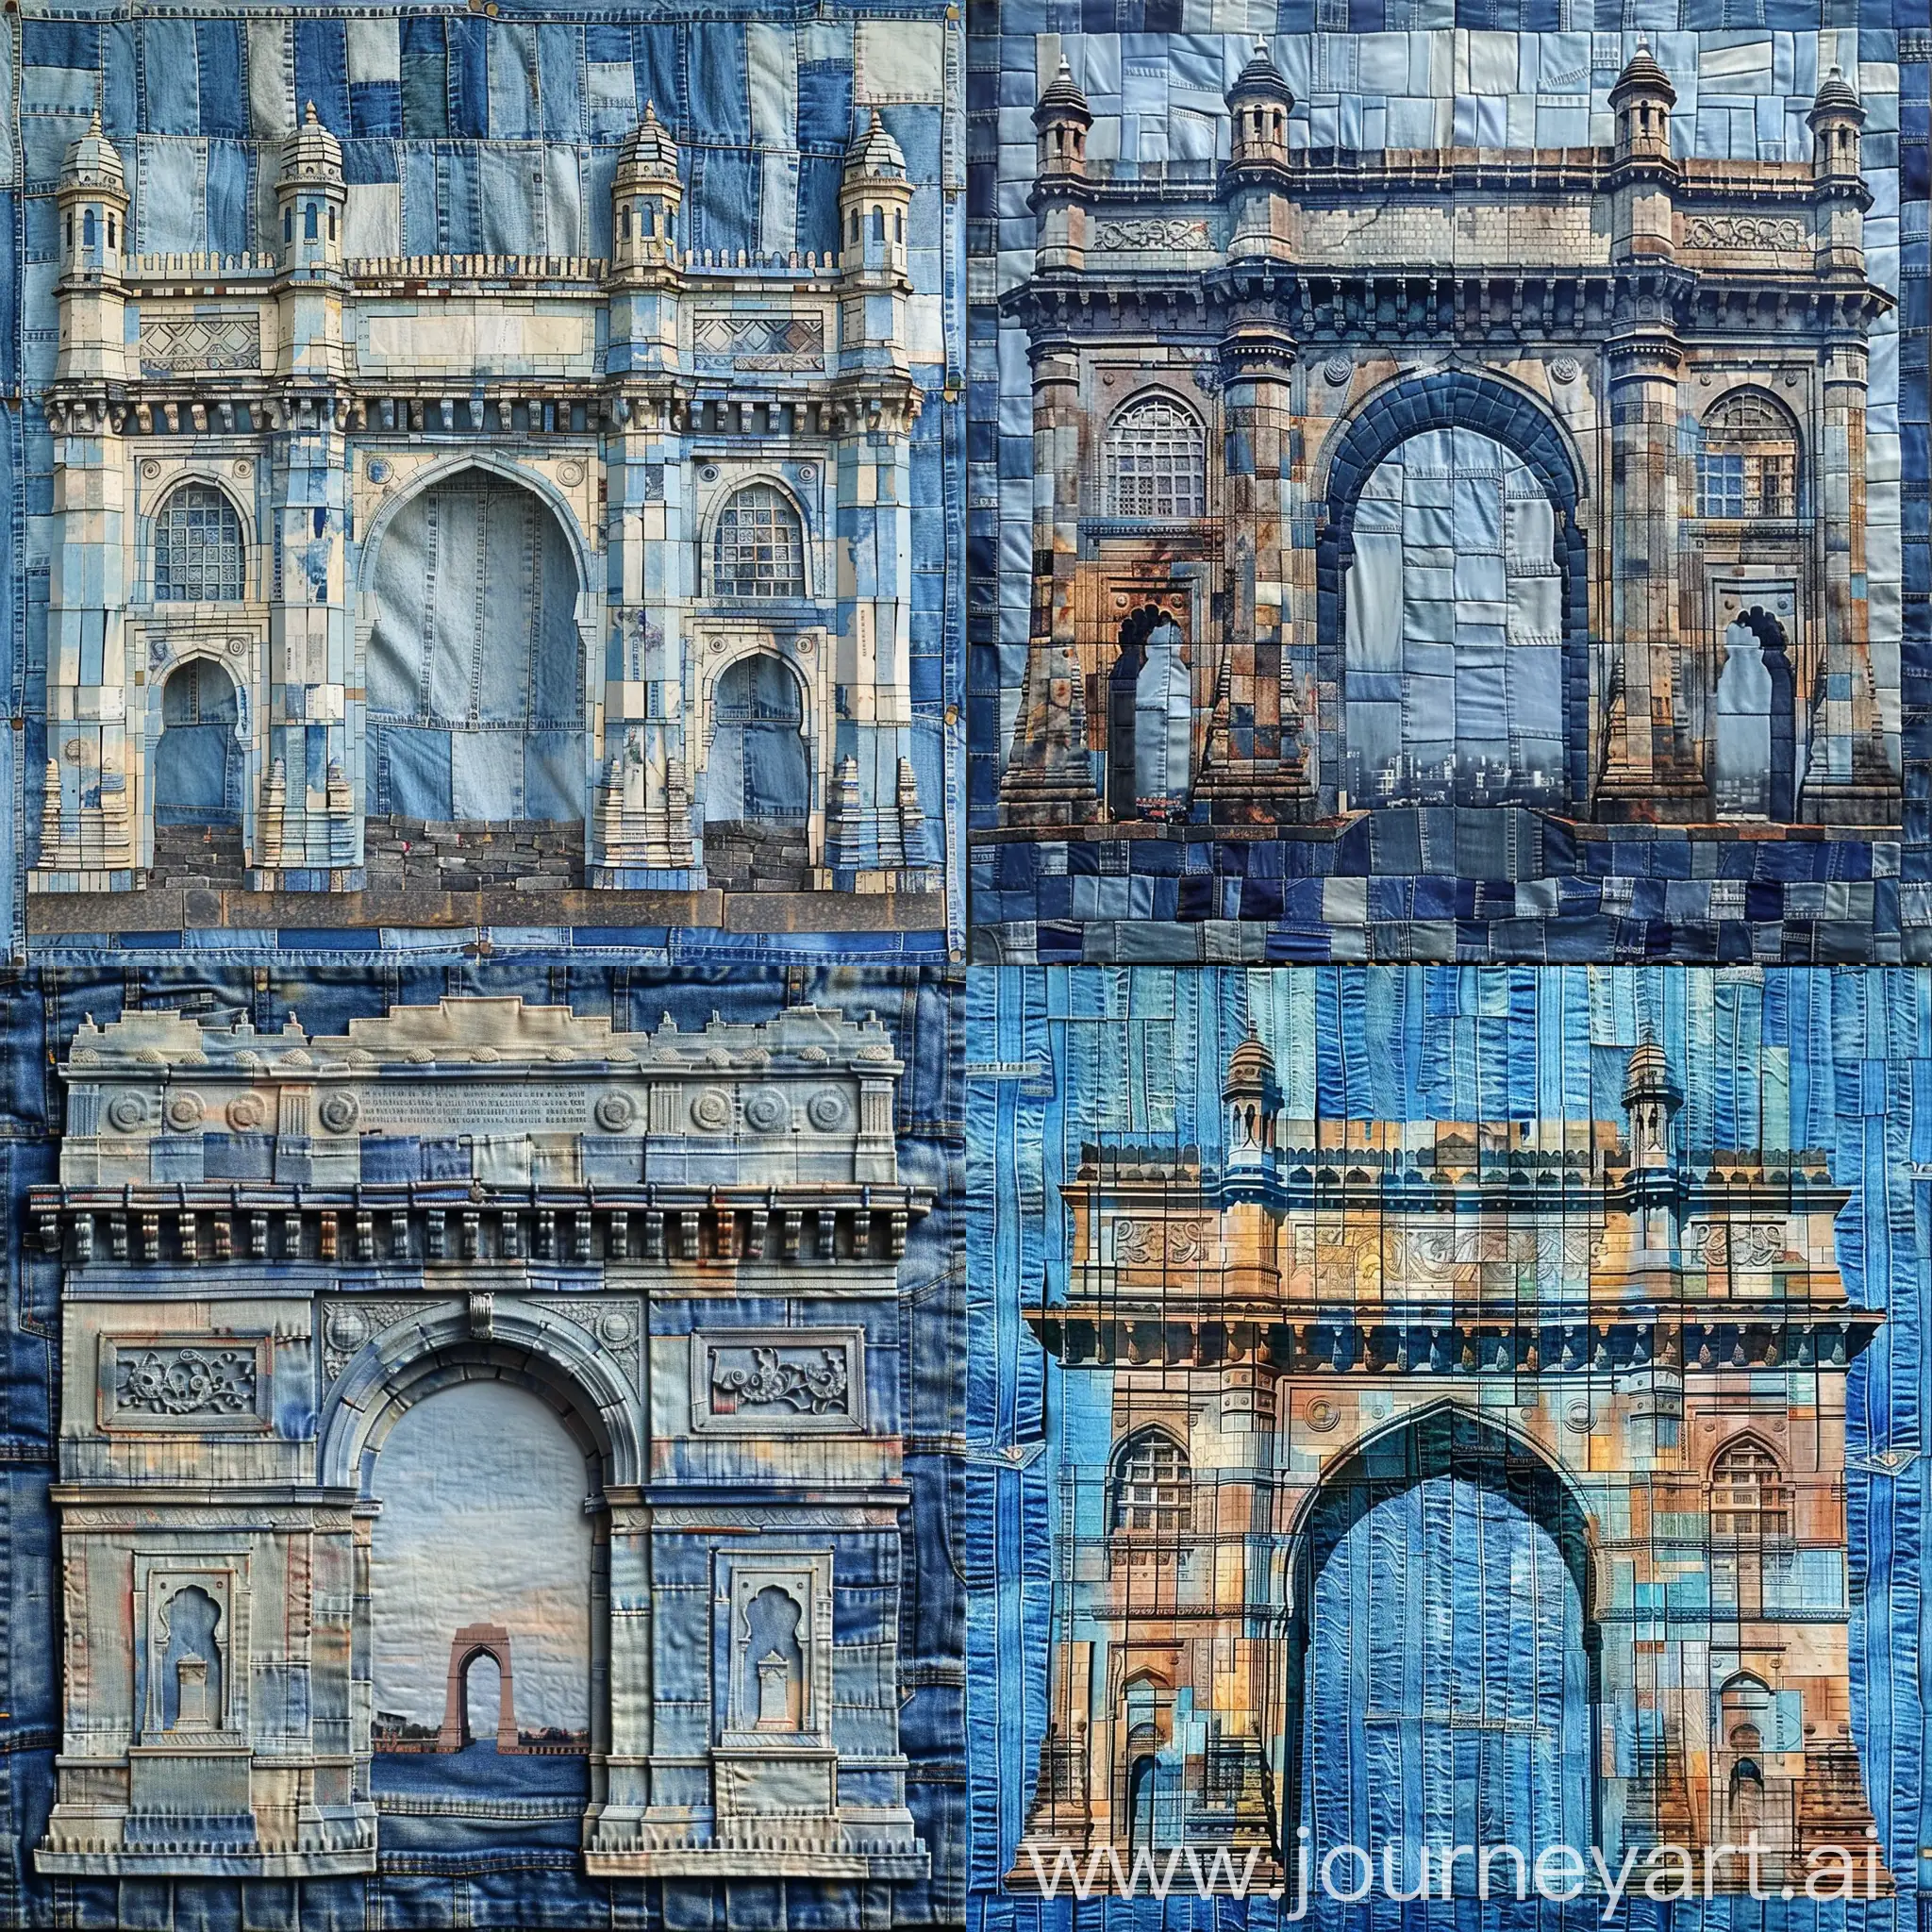 Gateway of India made of denim jeans